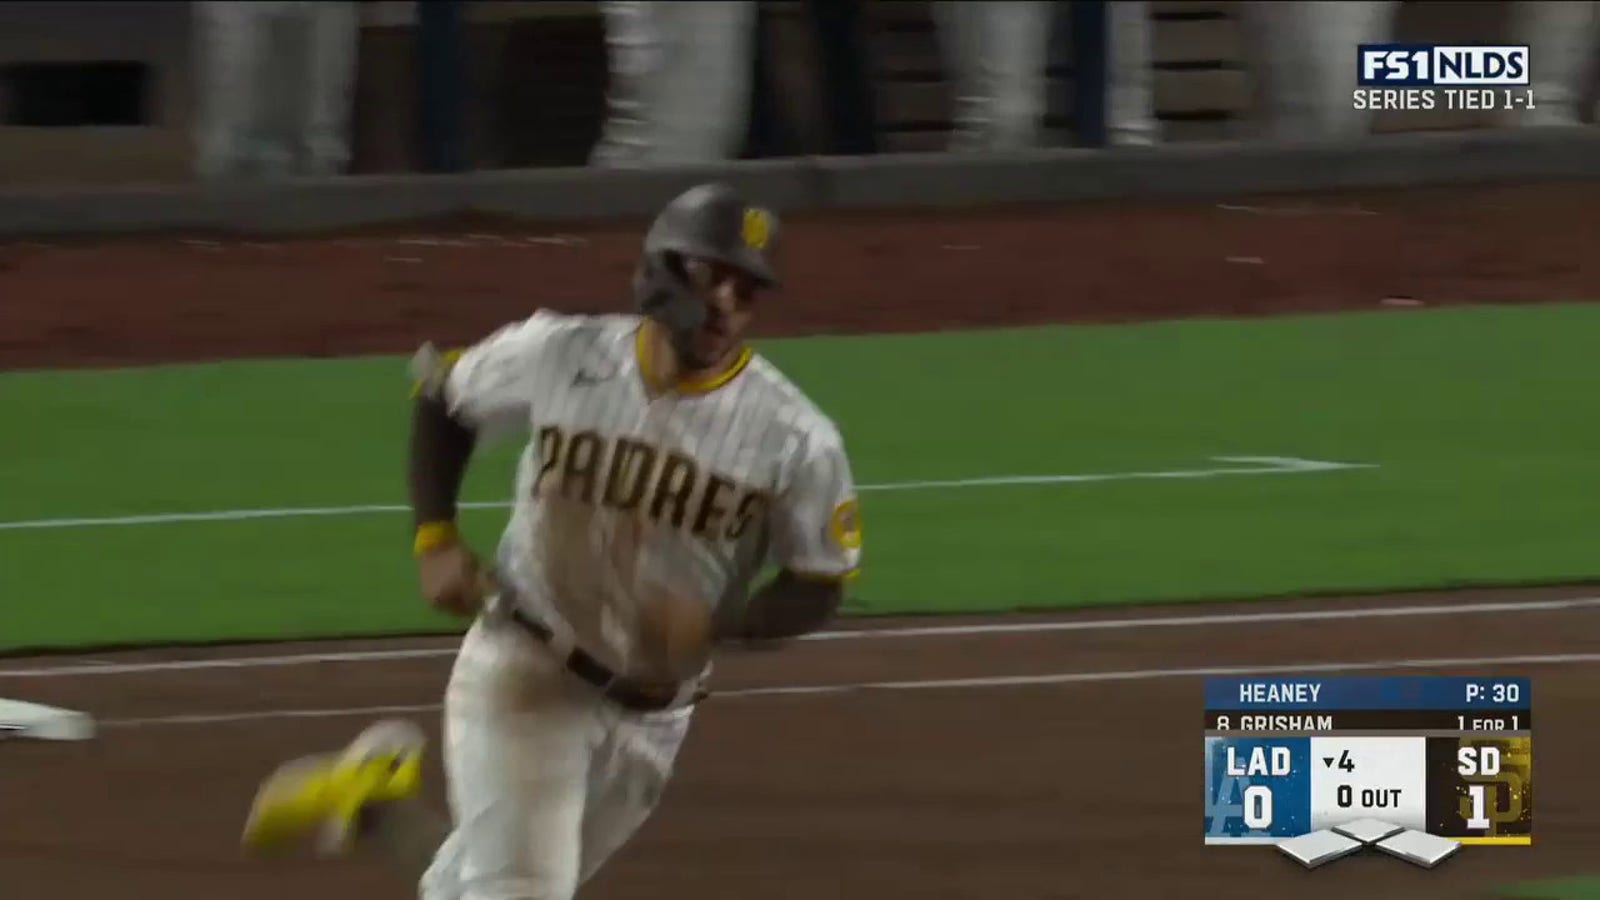 Trent Grisham hits a solo home run to give the Padres a 2-0 lead over the Dodgers